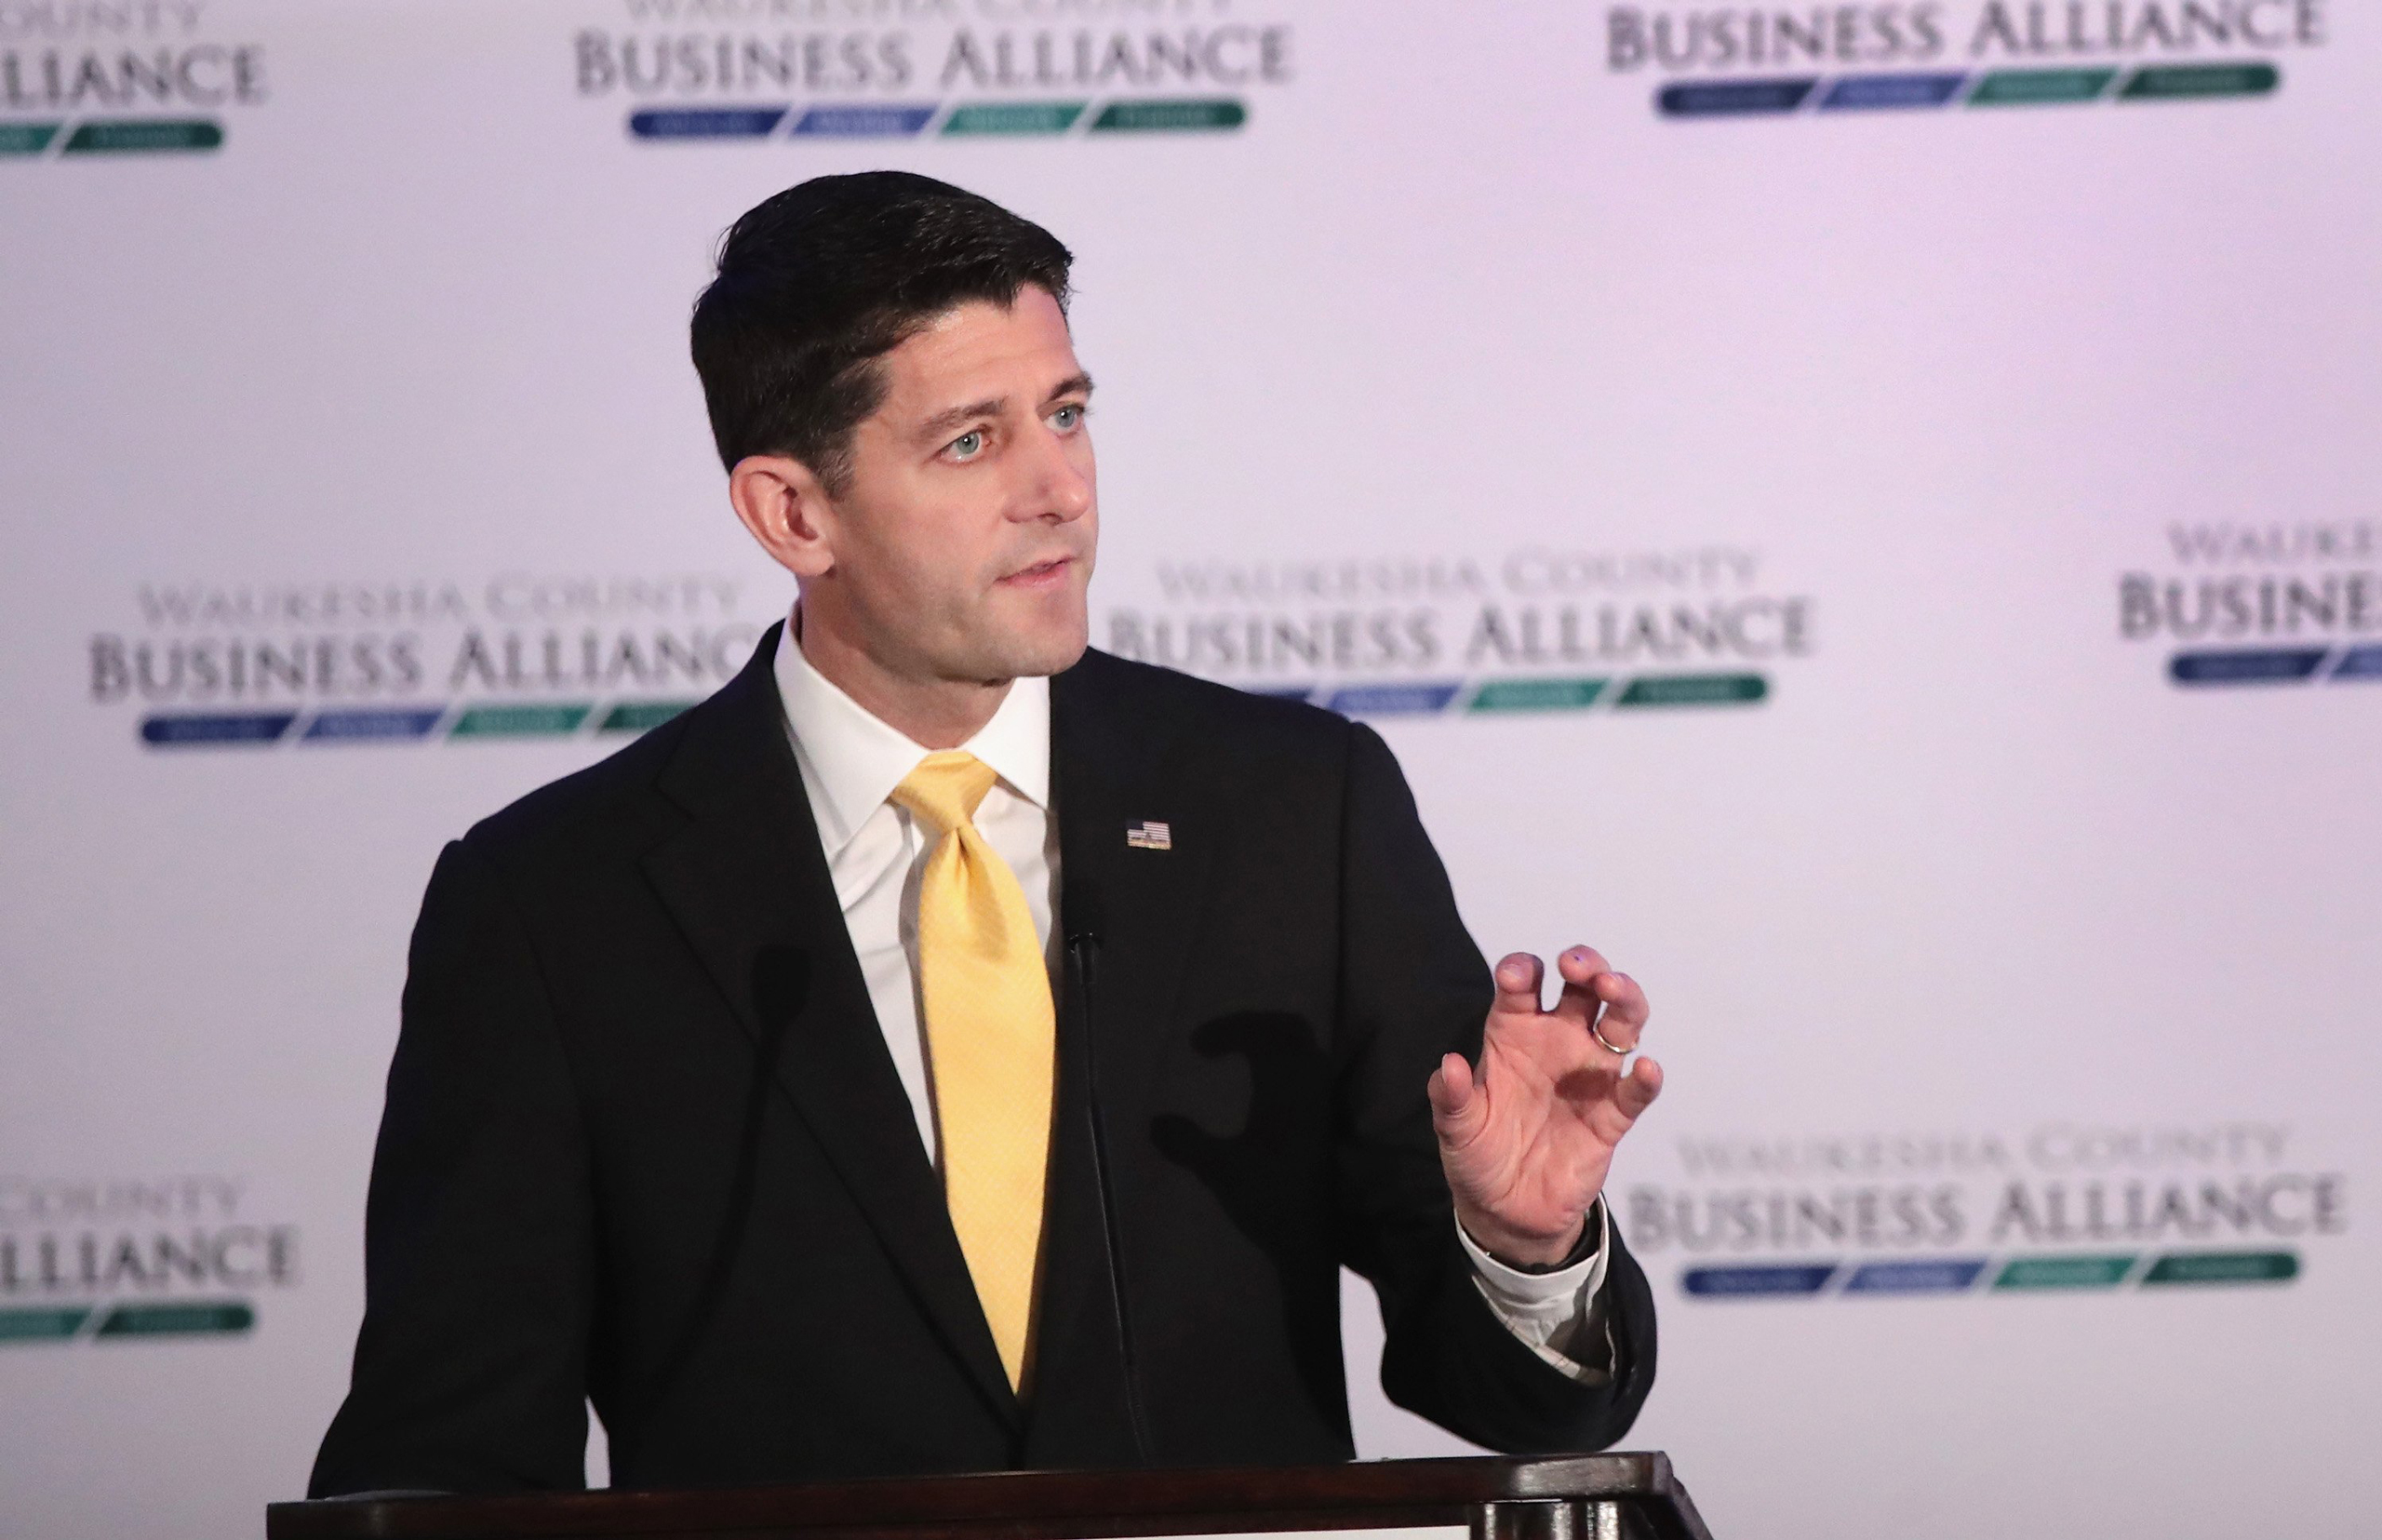 Speaker of the House Paul Ryan speaks with business and community leaders at the Waukesha County Business Alliance luncheon in Brookfield, Wi.,  on Oct. 13, 2016. (Scott Olson—Getty Images)